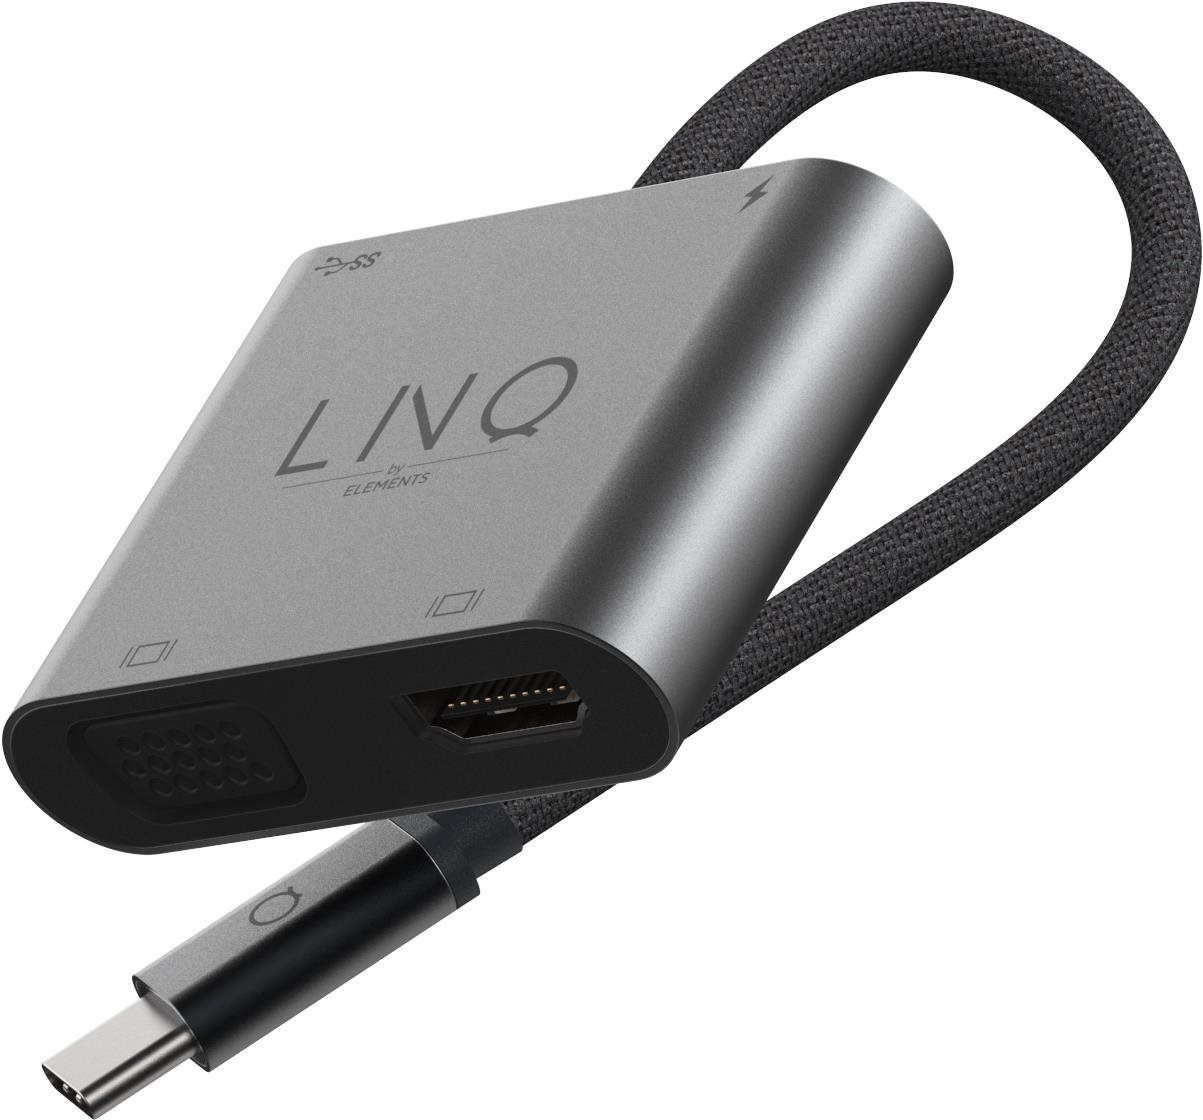 LINQ 4K HDMI Adapter with PD, USB-A and VGA